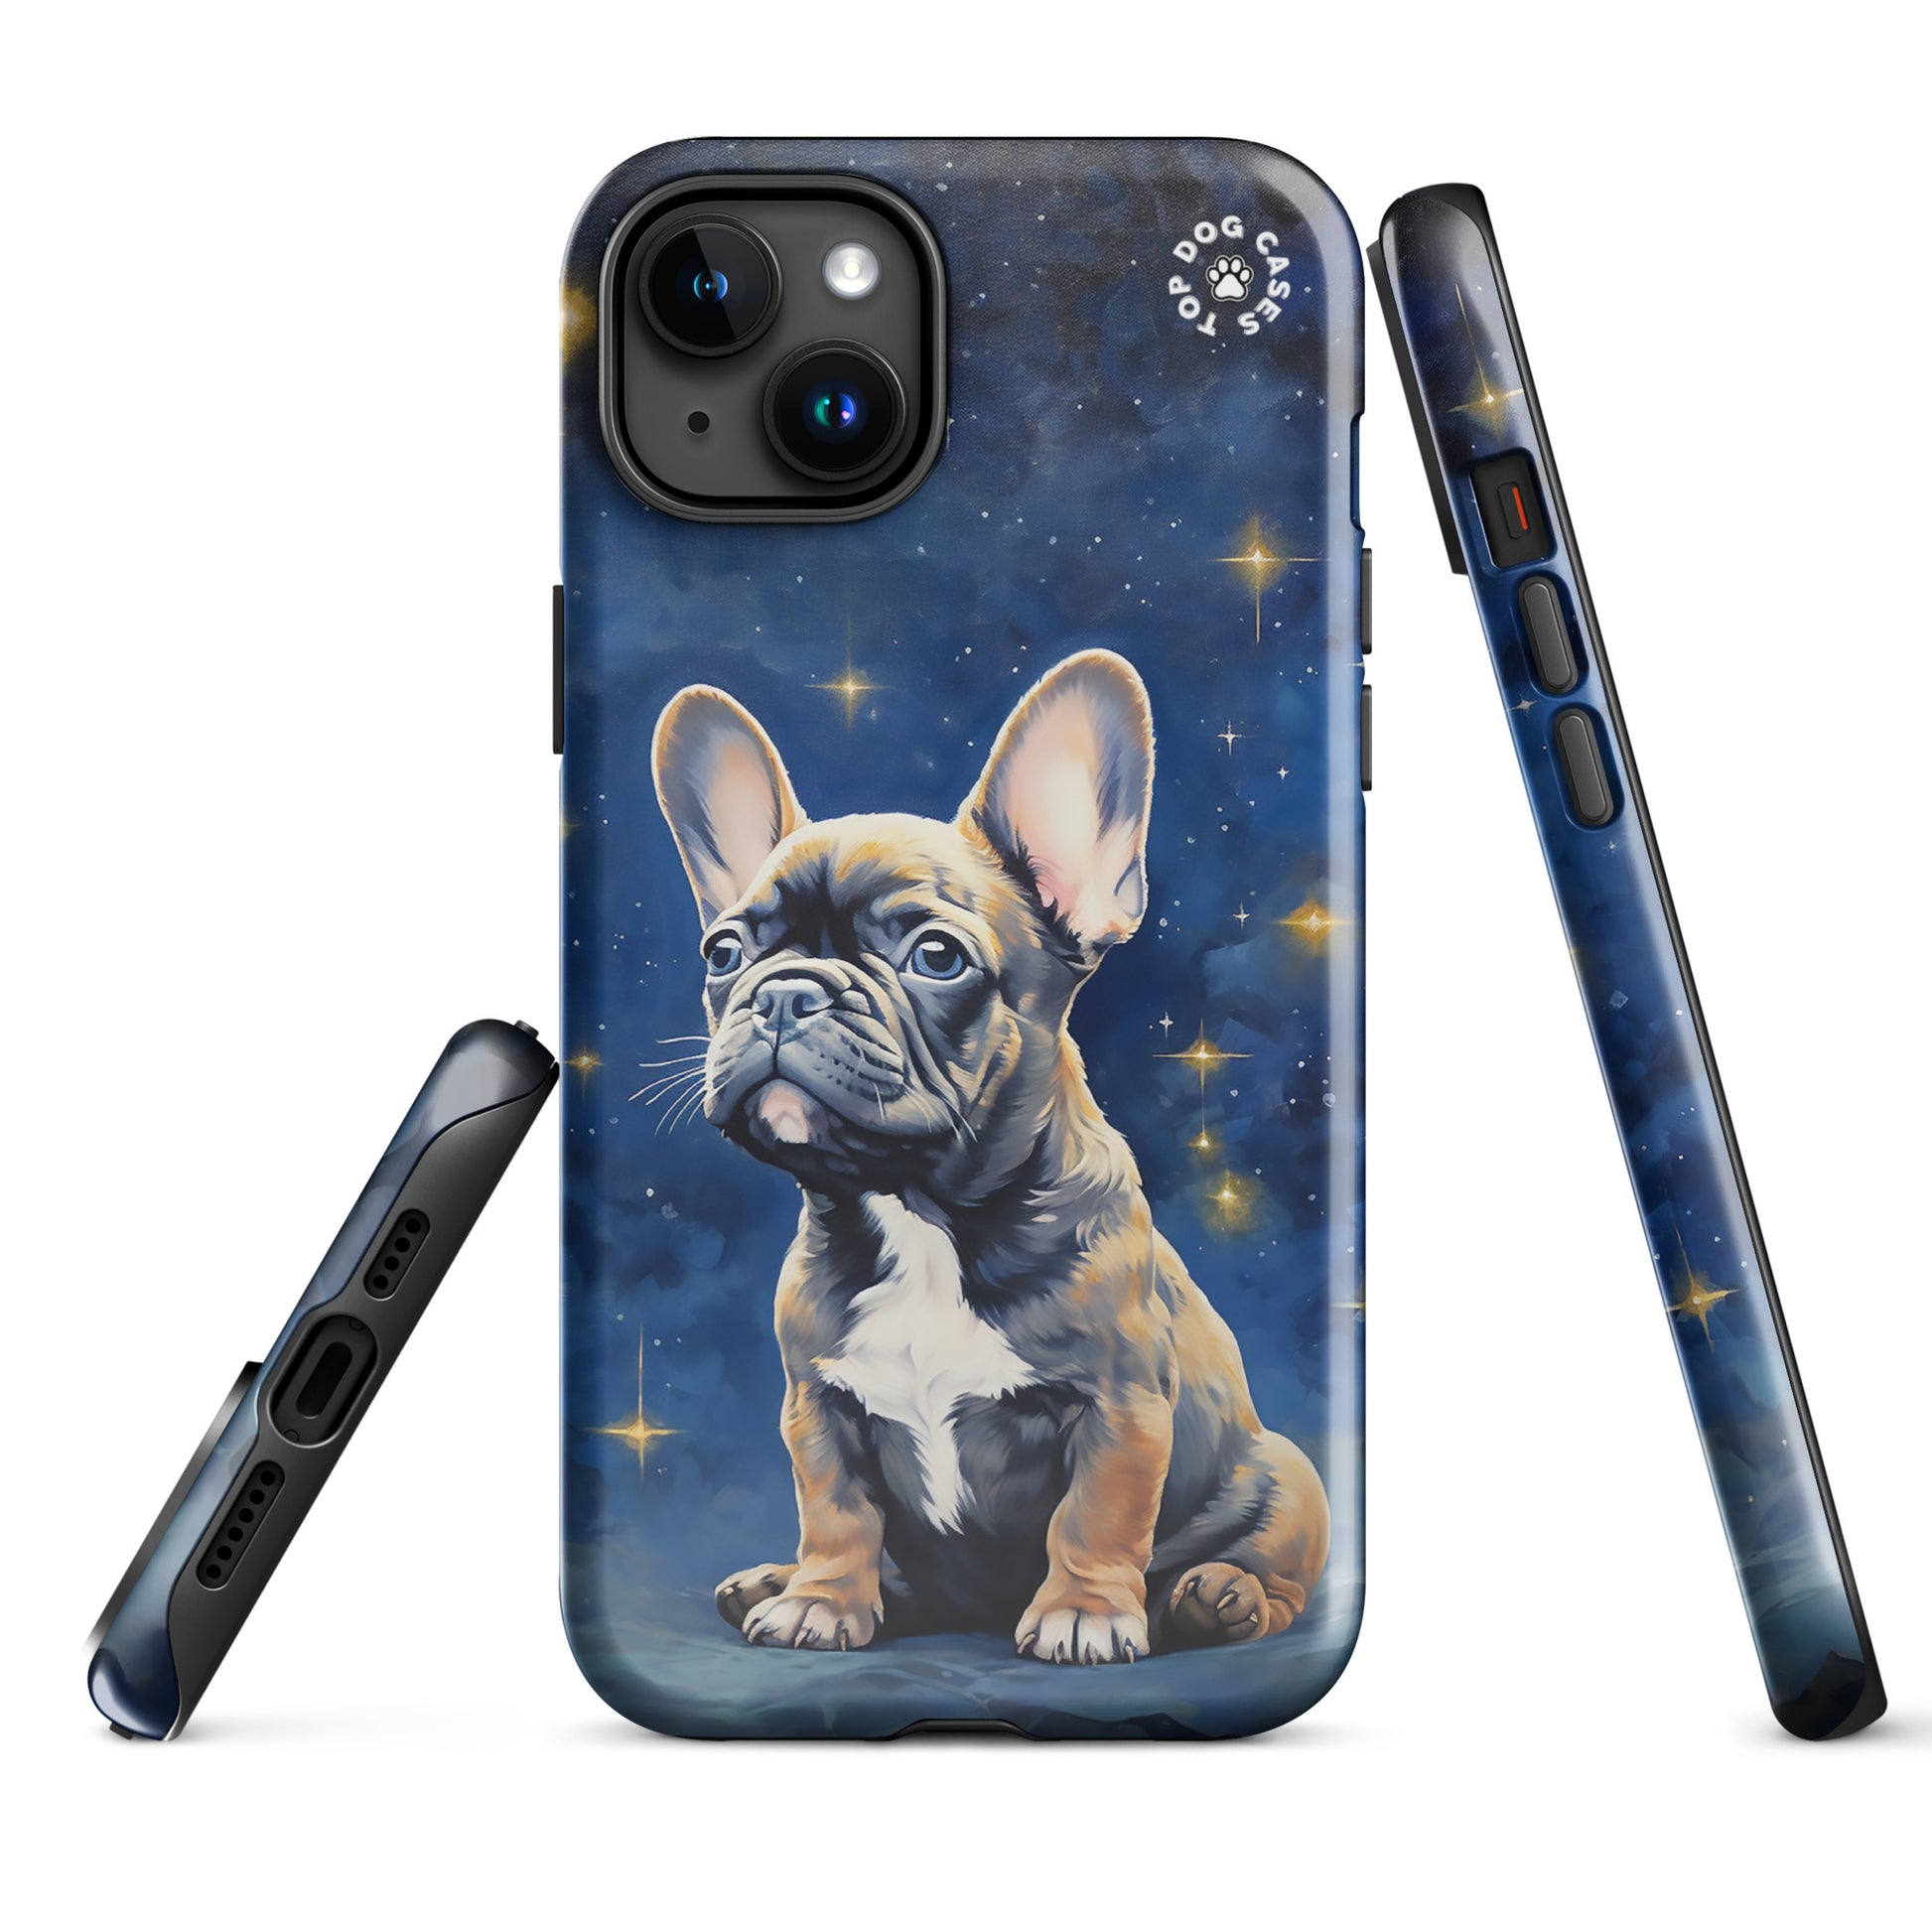 Cute iPhone Cases French Bulldog - Top Dog Cases - #French Bulldog, #FrenchBulldog, #iPhone, #iPhone11, #iphone11case, #iPhone12, #iPhone12case, #iPhone13, #iPhone13case, #iPhone13DogCase, #iPhone13Mini, #iPhone13Pro, #iPhone13ProMax, #iPhone14, #iPhone14case, #iPhone14DogCase, #iPhone14Plus, #iPhone14Pluscase, #iPhone14Pro, #iPhone14ProMax, #iPhone14ProMaxCase, #iPhone15, #iPhone15case, #iPhonecase, #iphonedogcase